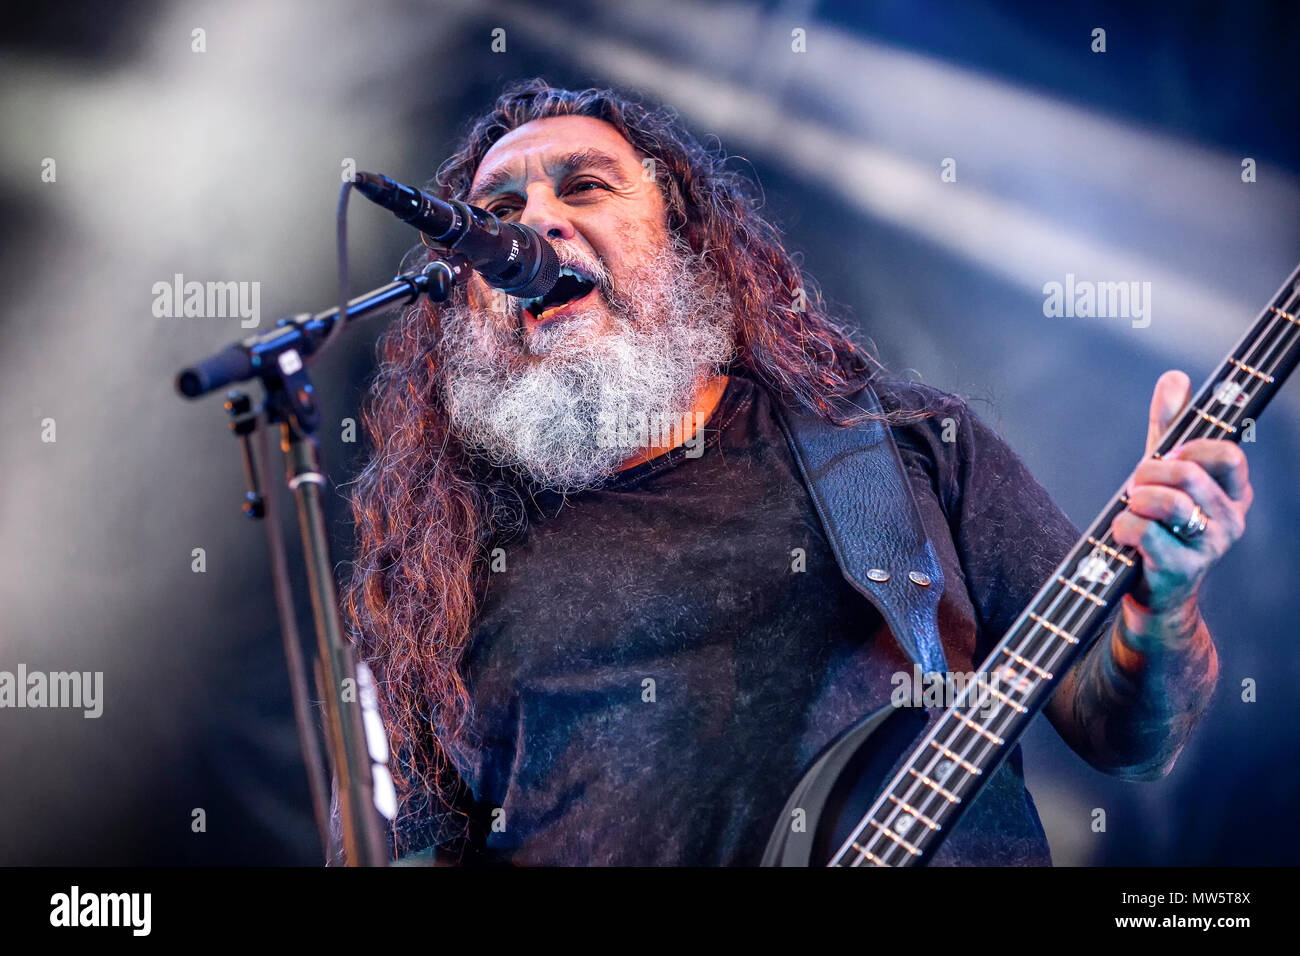 Norway, Halden - June 23, 2017. The American thrash metal band Slayer  performs a live concert during the Norwegian music festival Tons of Rock  2017. Here vocalist and bass player Tom Araya